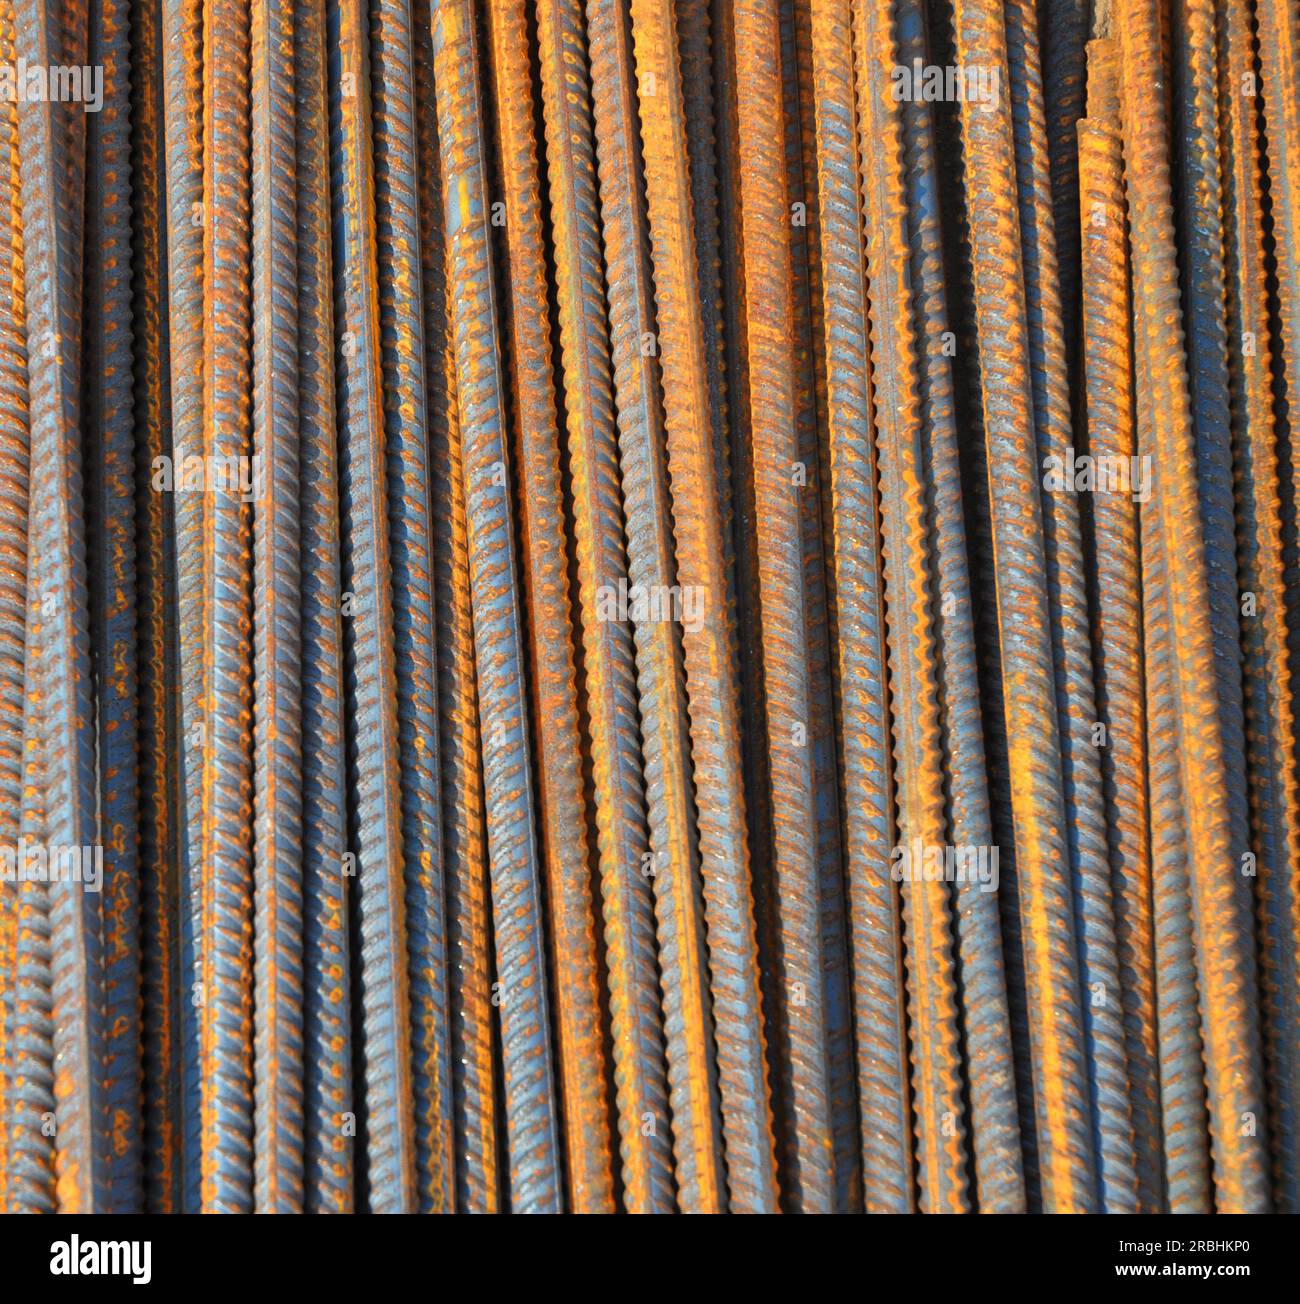 Rebar (short for reinforcing bar) textured background. Reinforcing steel, reinforcement steel, is a steel bar used as a tension device in reinforced c Stock Photo